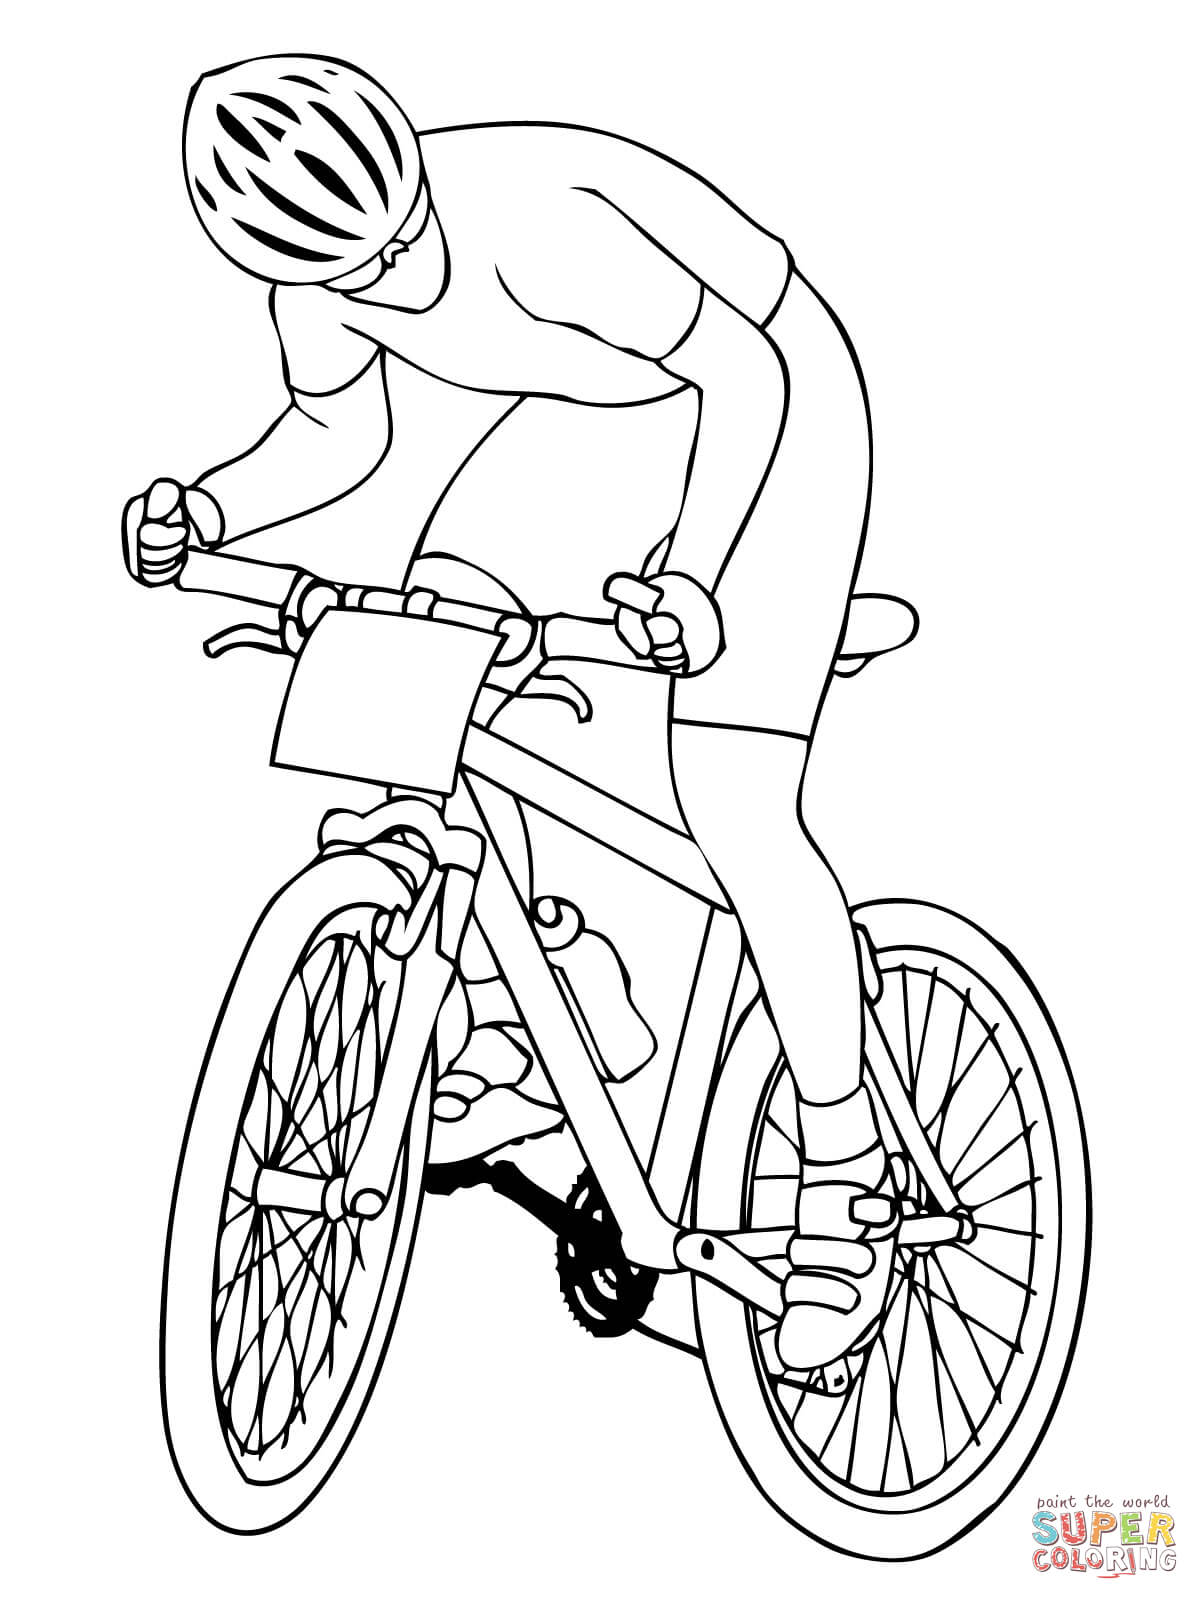 Cycling coloring pages | Free Coloring Pages